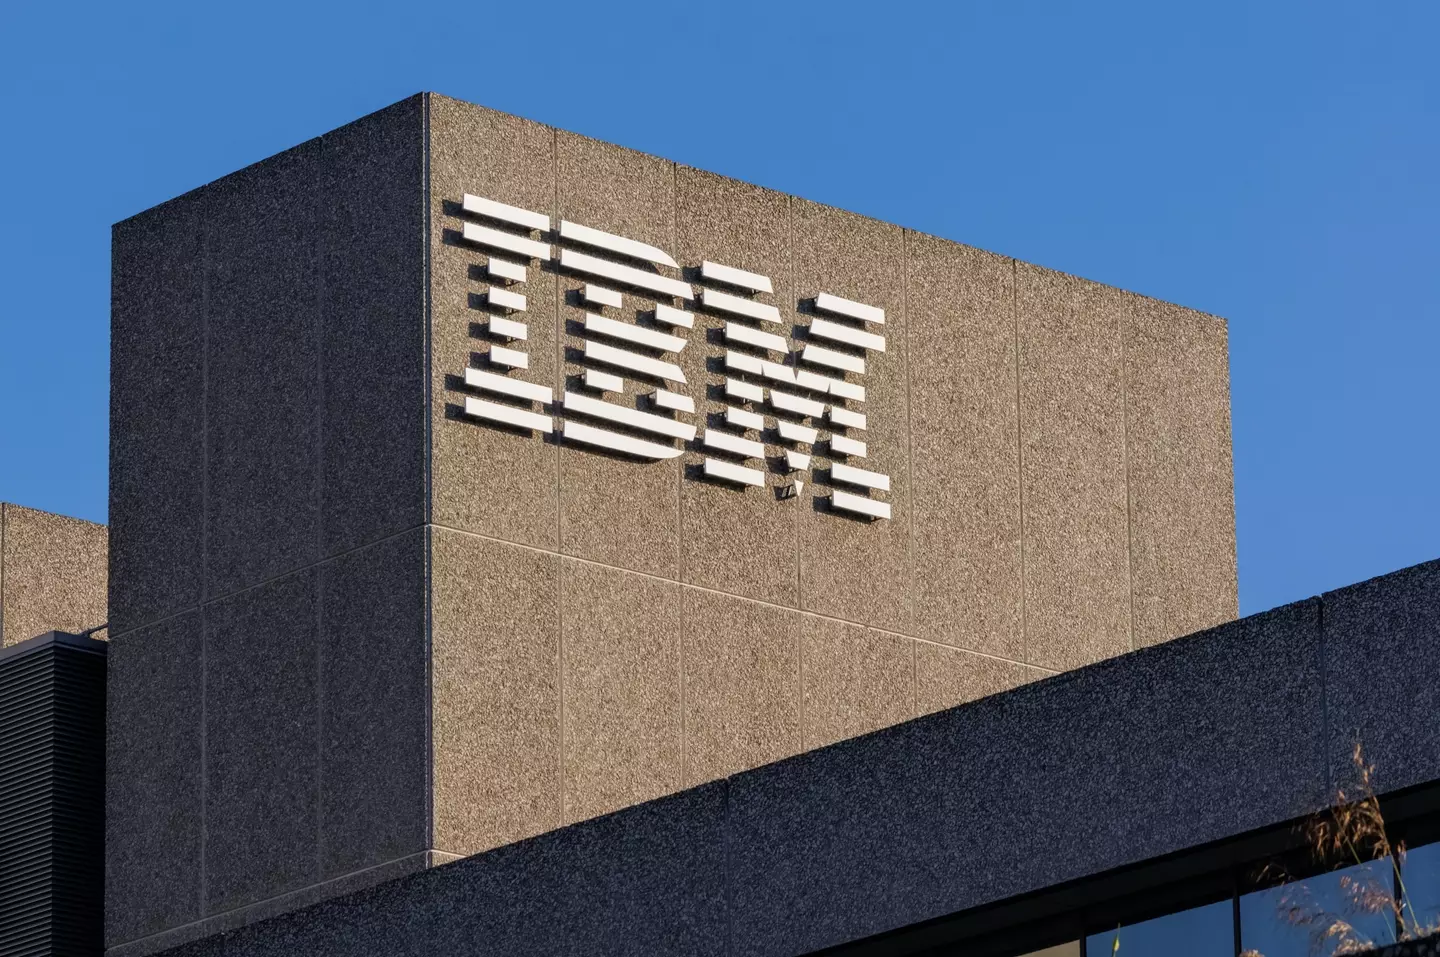 An employment judge described IBM's disability plan as 'generous'.